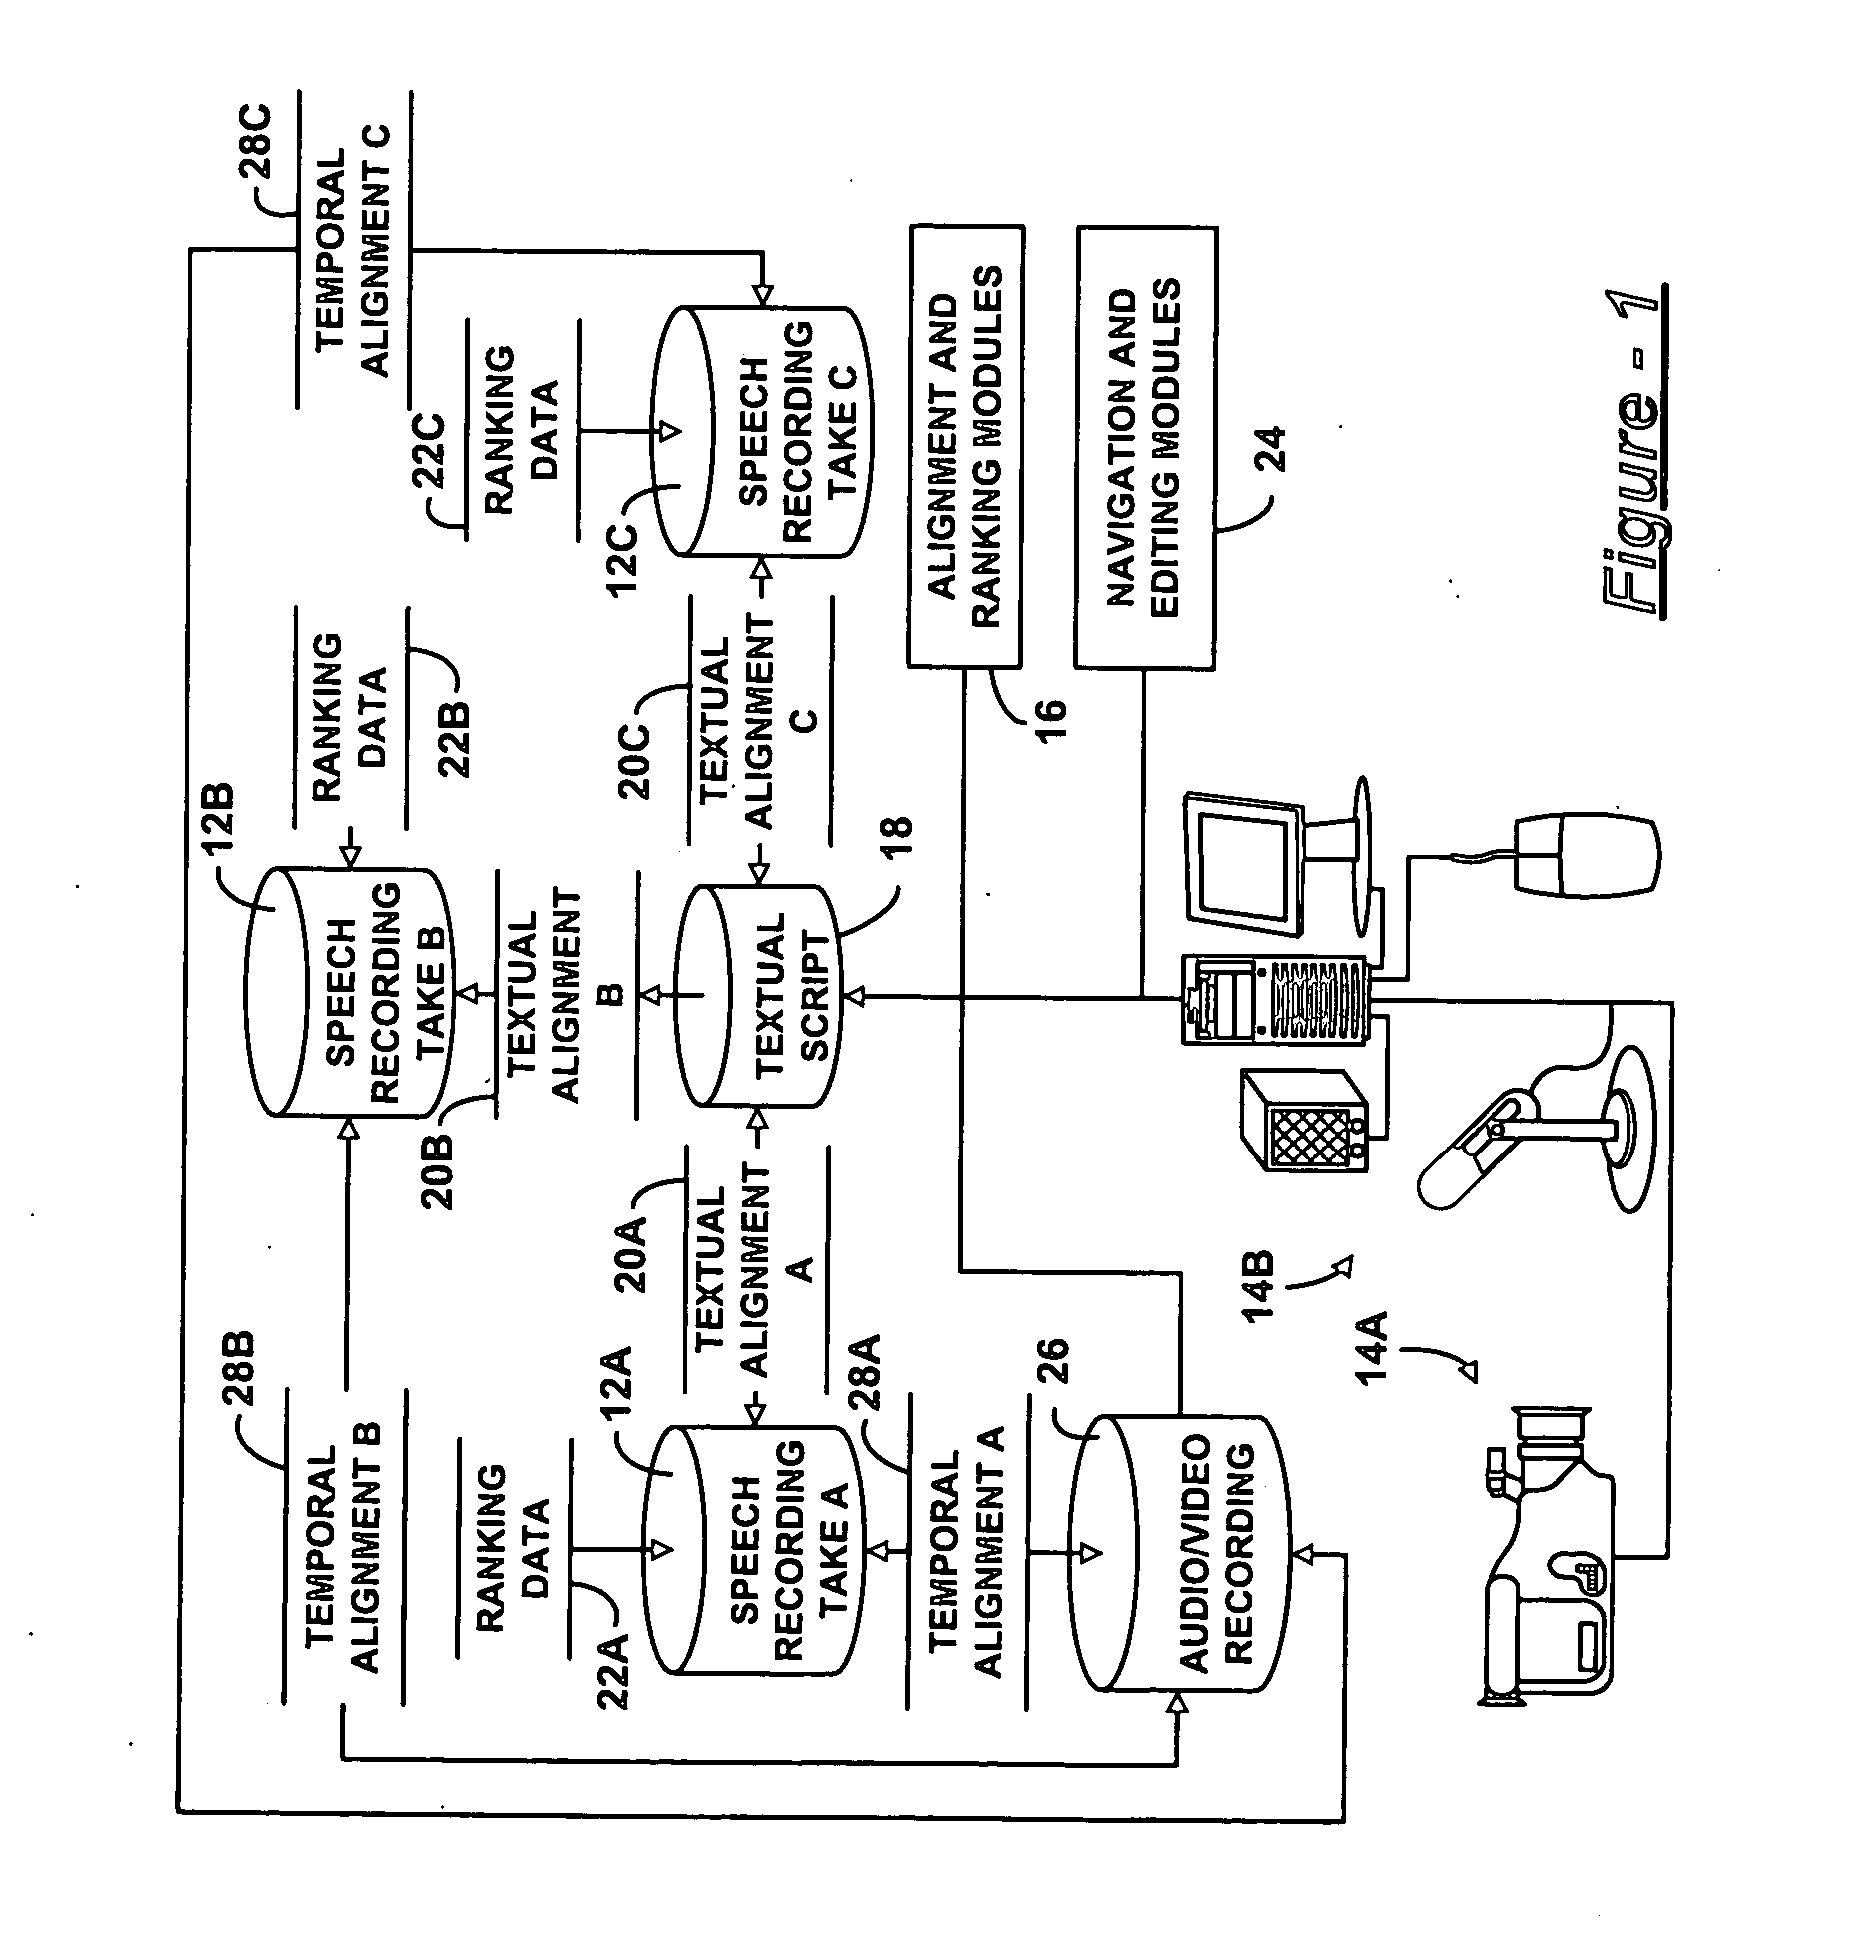 Media production system using time alignment to scripts